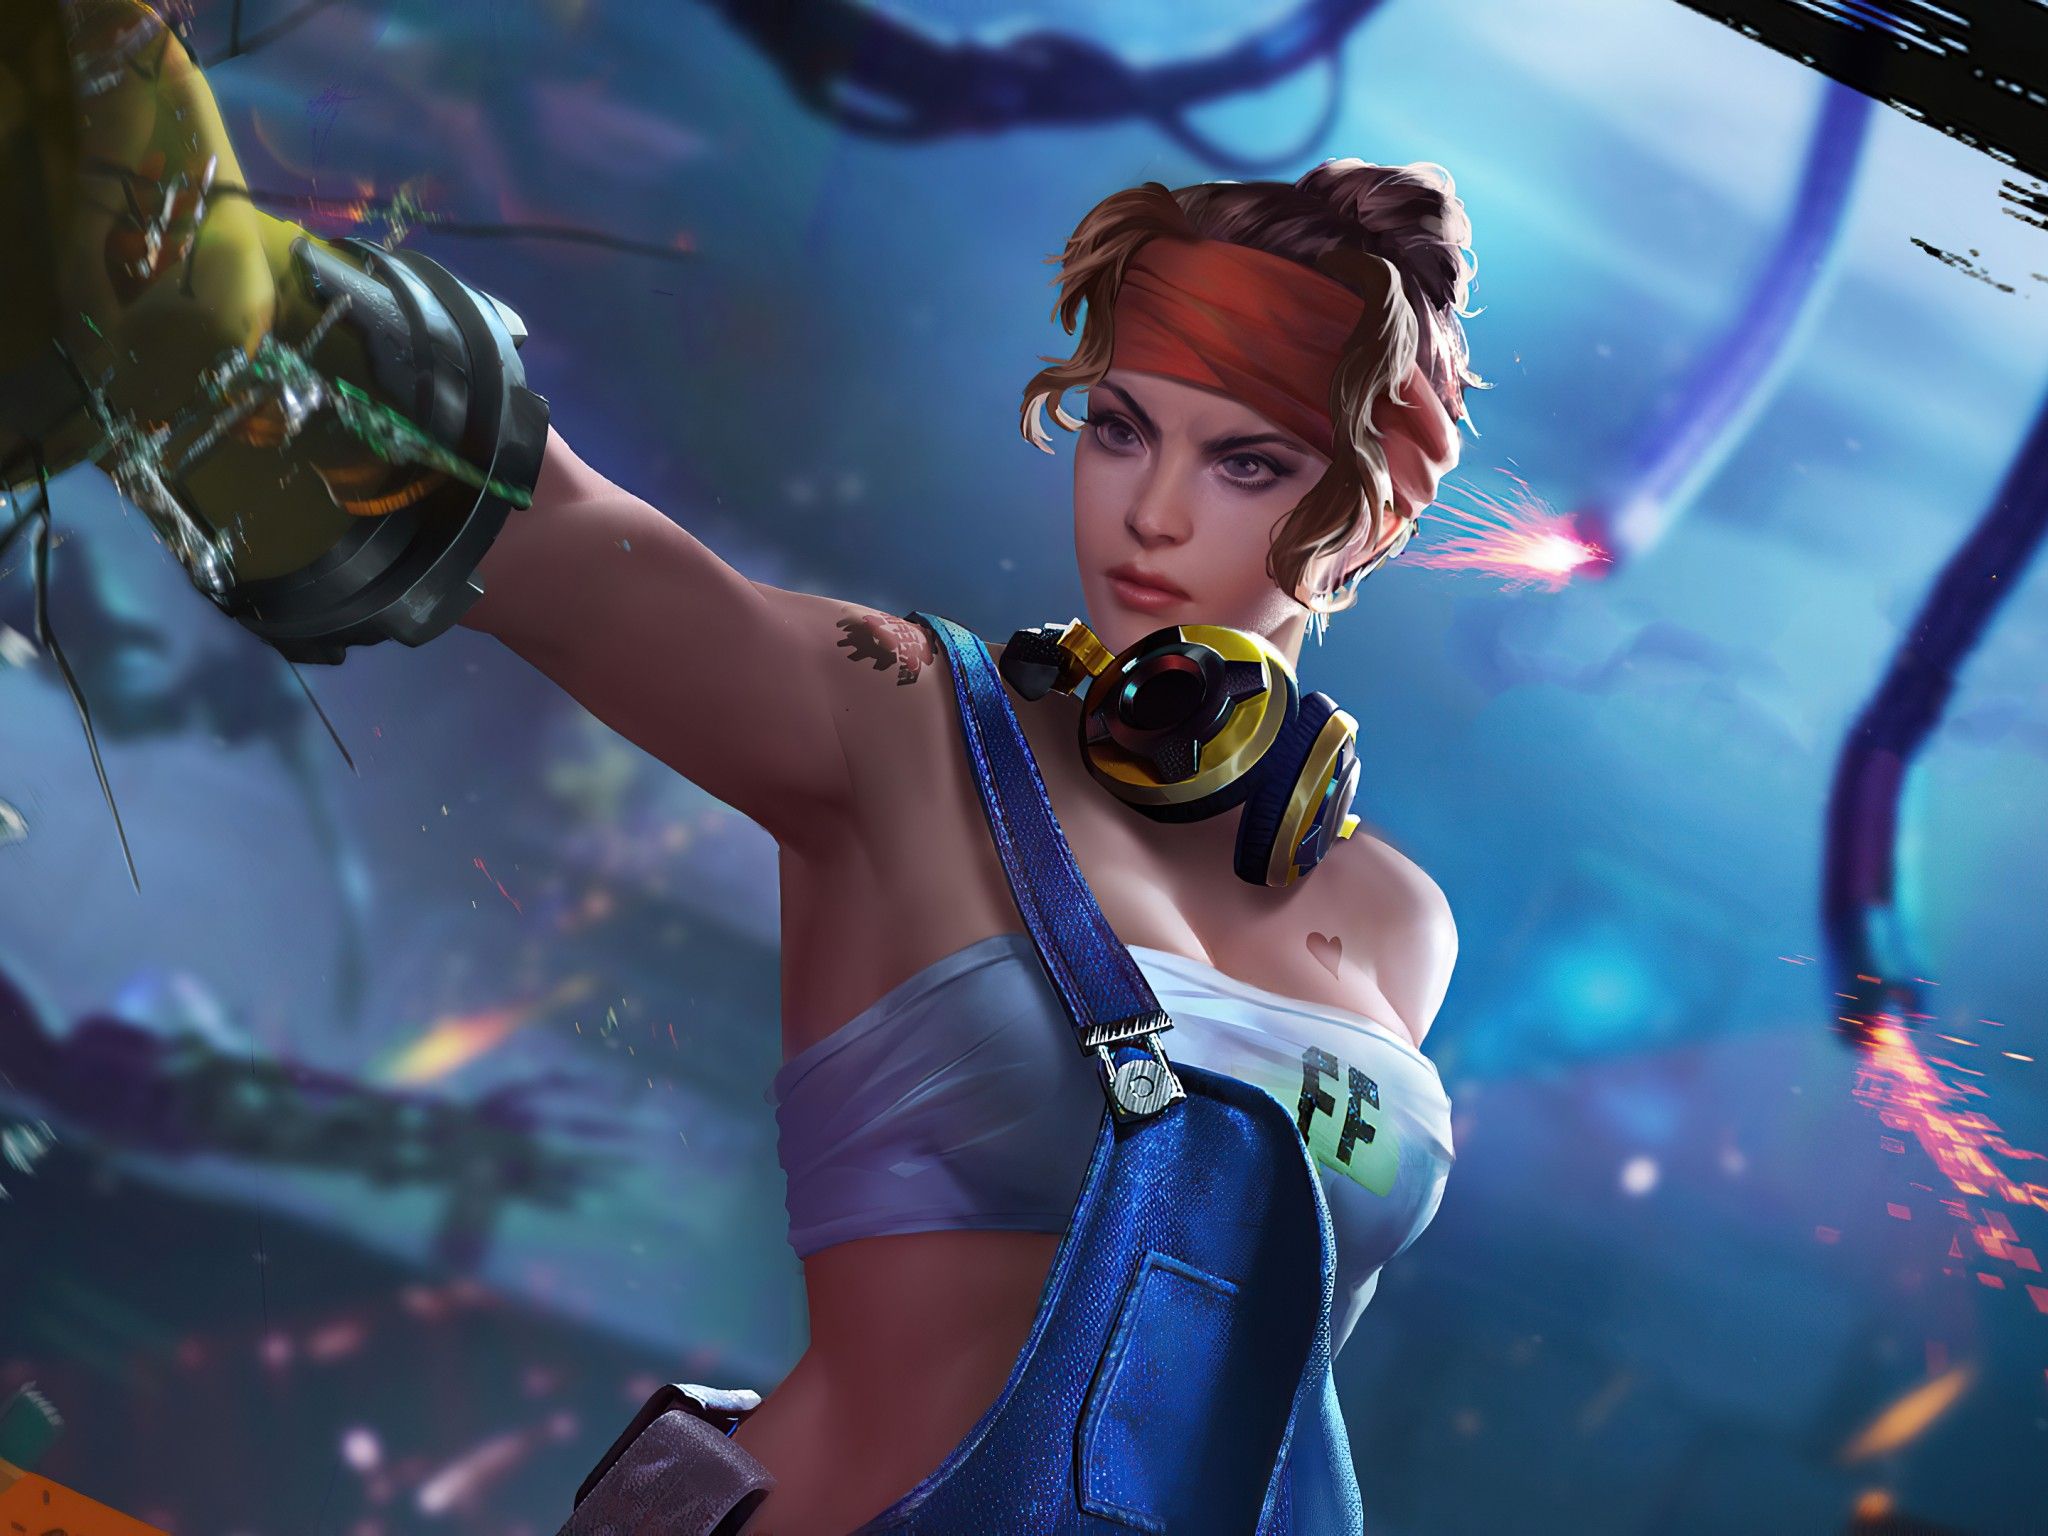 Shani 4K Wallpaper, Garena Free Fire, Android games, iOS games, Games